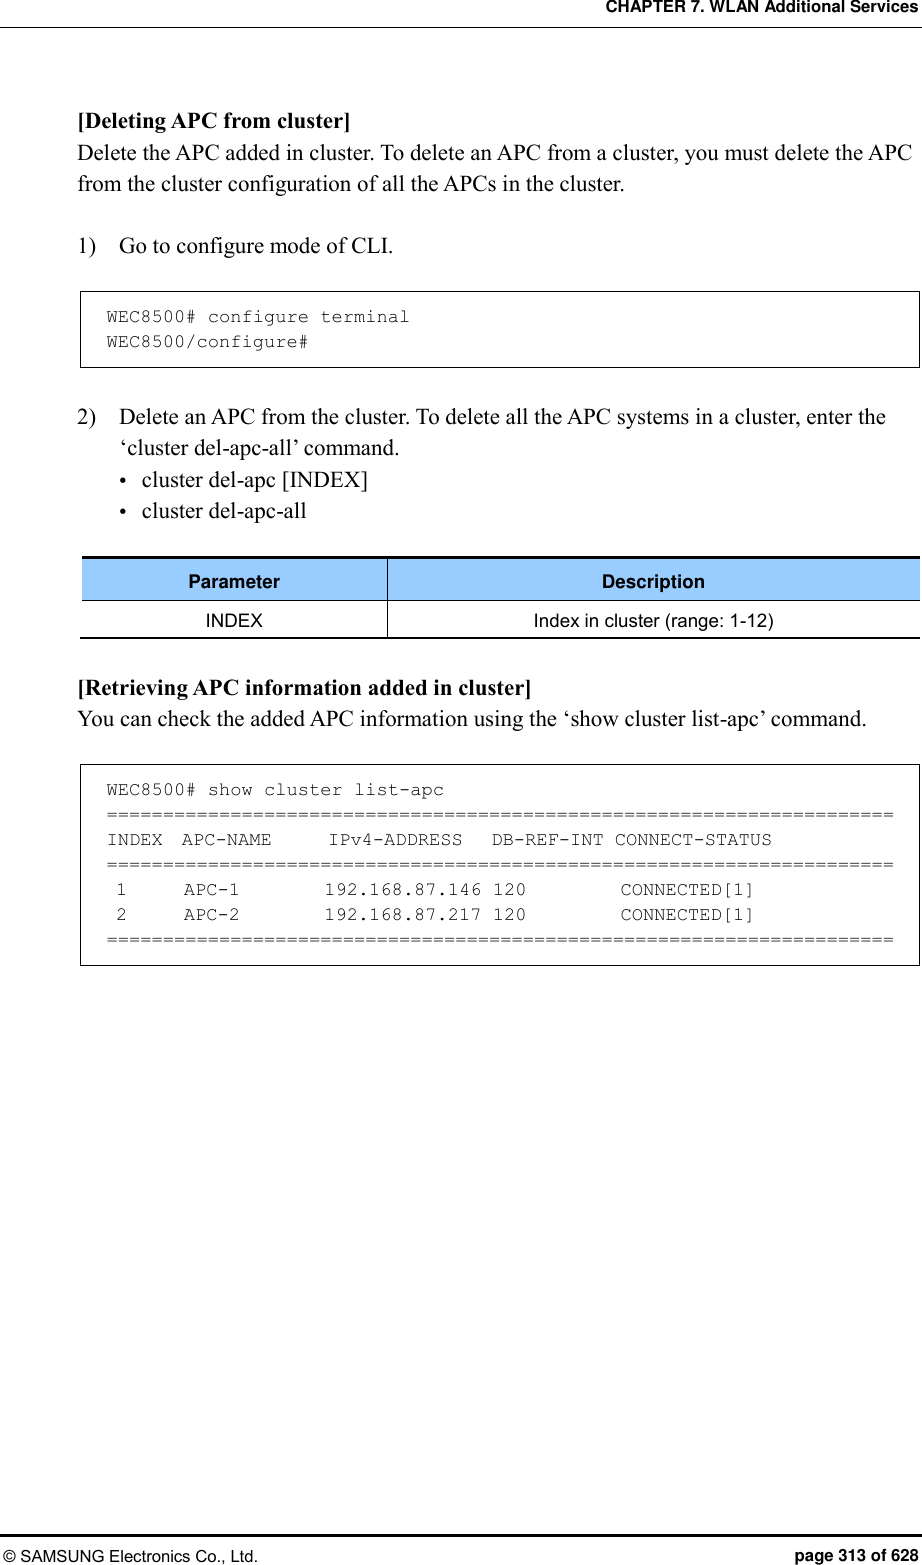 CHAPTER 7. WLAN Additional Services © SAMSUNG Electronics Co., Ltd.  page 313 of 628 [Deleting APC from cluster] Delete the APC added in cluster. To delete an APC from a cluster, you must delete the APC from the cluster configuration of all the APCs in the cluster.    1)    Go to configure mode of CLI.  WEC8500# configure terminal WEC8500/configure#  2)    Delete an APC from the cluster. To delete all the APC systems in a cluster, enter the ‘cluster del-apc-all’ command.  cluster del-apc [INDEX]  cluster del-apc-all  Parameter Description INDEX Index in cluster (range: 1-12)  [Retrieving APC information added in cluster] You can check the added APC information using the ‘show cluster list-apc’ command.  WEC8500# show cluster list-apc ====================================================================== INDEX  APC-NAME      IPv4-ADDRESS   DB-REF-INT CONNECT-STATUS ======================================================================  1      APC-1         192.168.87.146 120          CONNECTED[1]  2      APC-2         192.168.87.217 120          CONNECTED[1] ======================================================================  